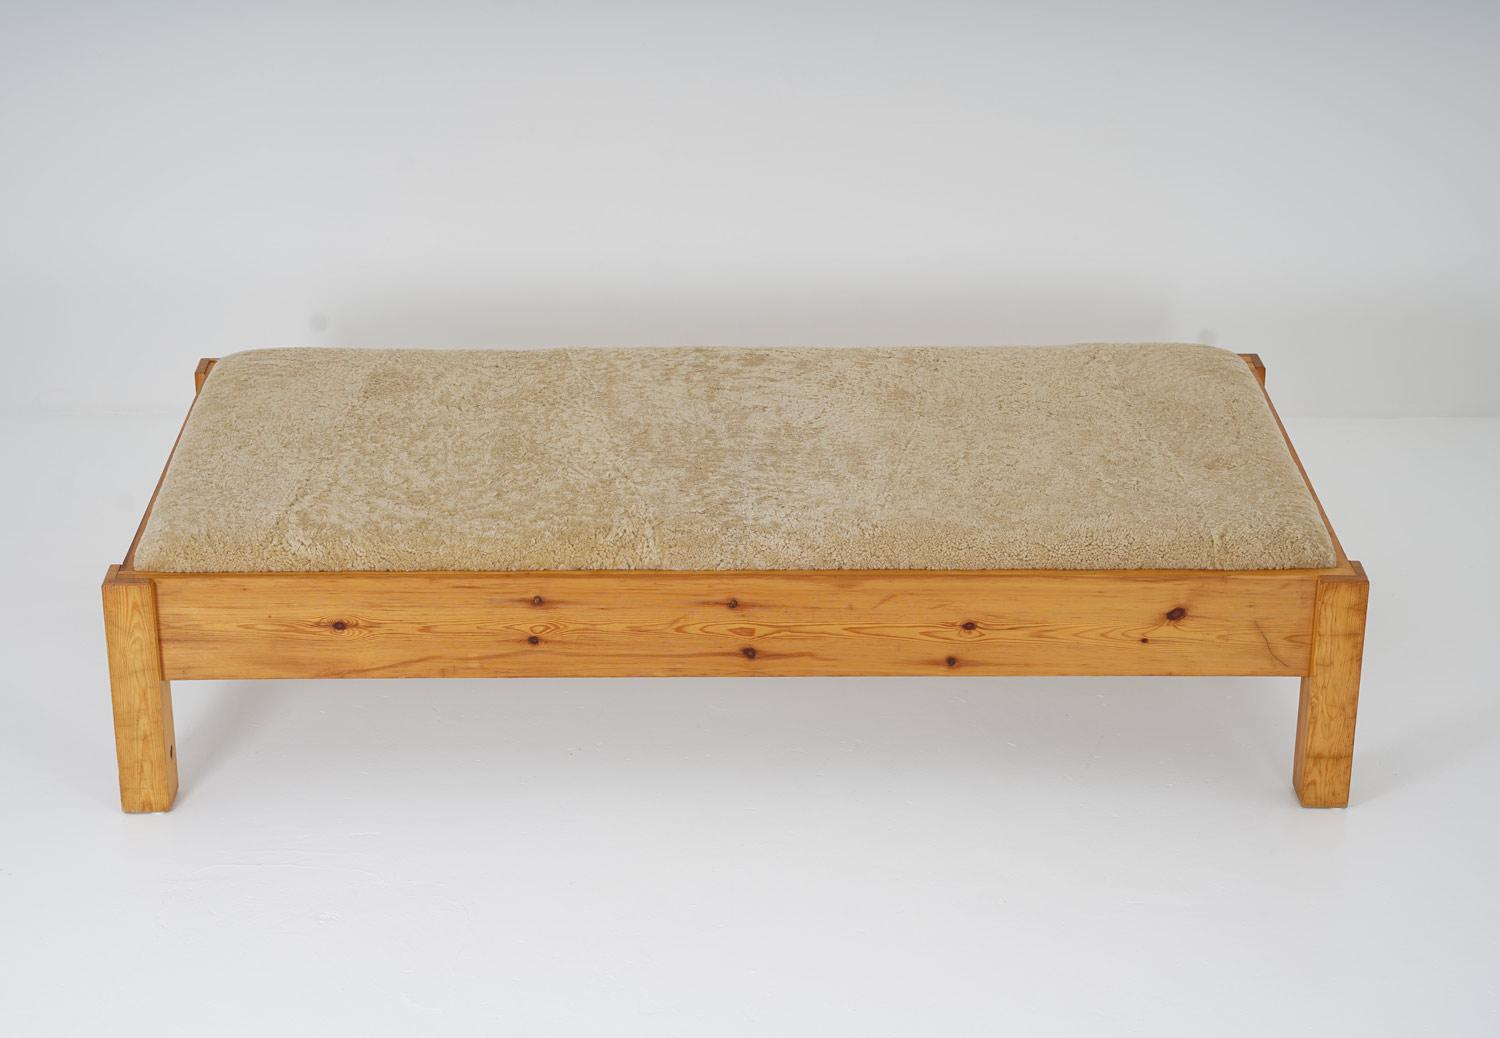 Daybed made of solid pine, manufactured in Sweden, 1970s.

Condition: Signs of age and use on the wood, newly reupholstered in sheepskin